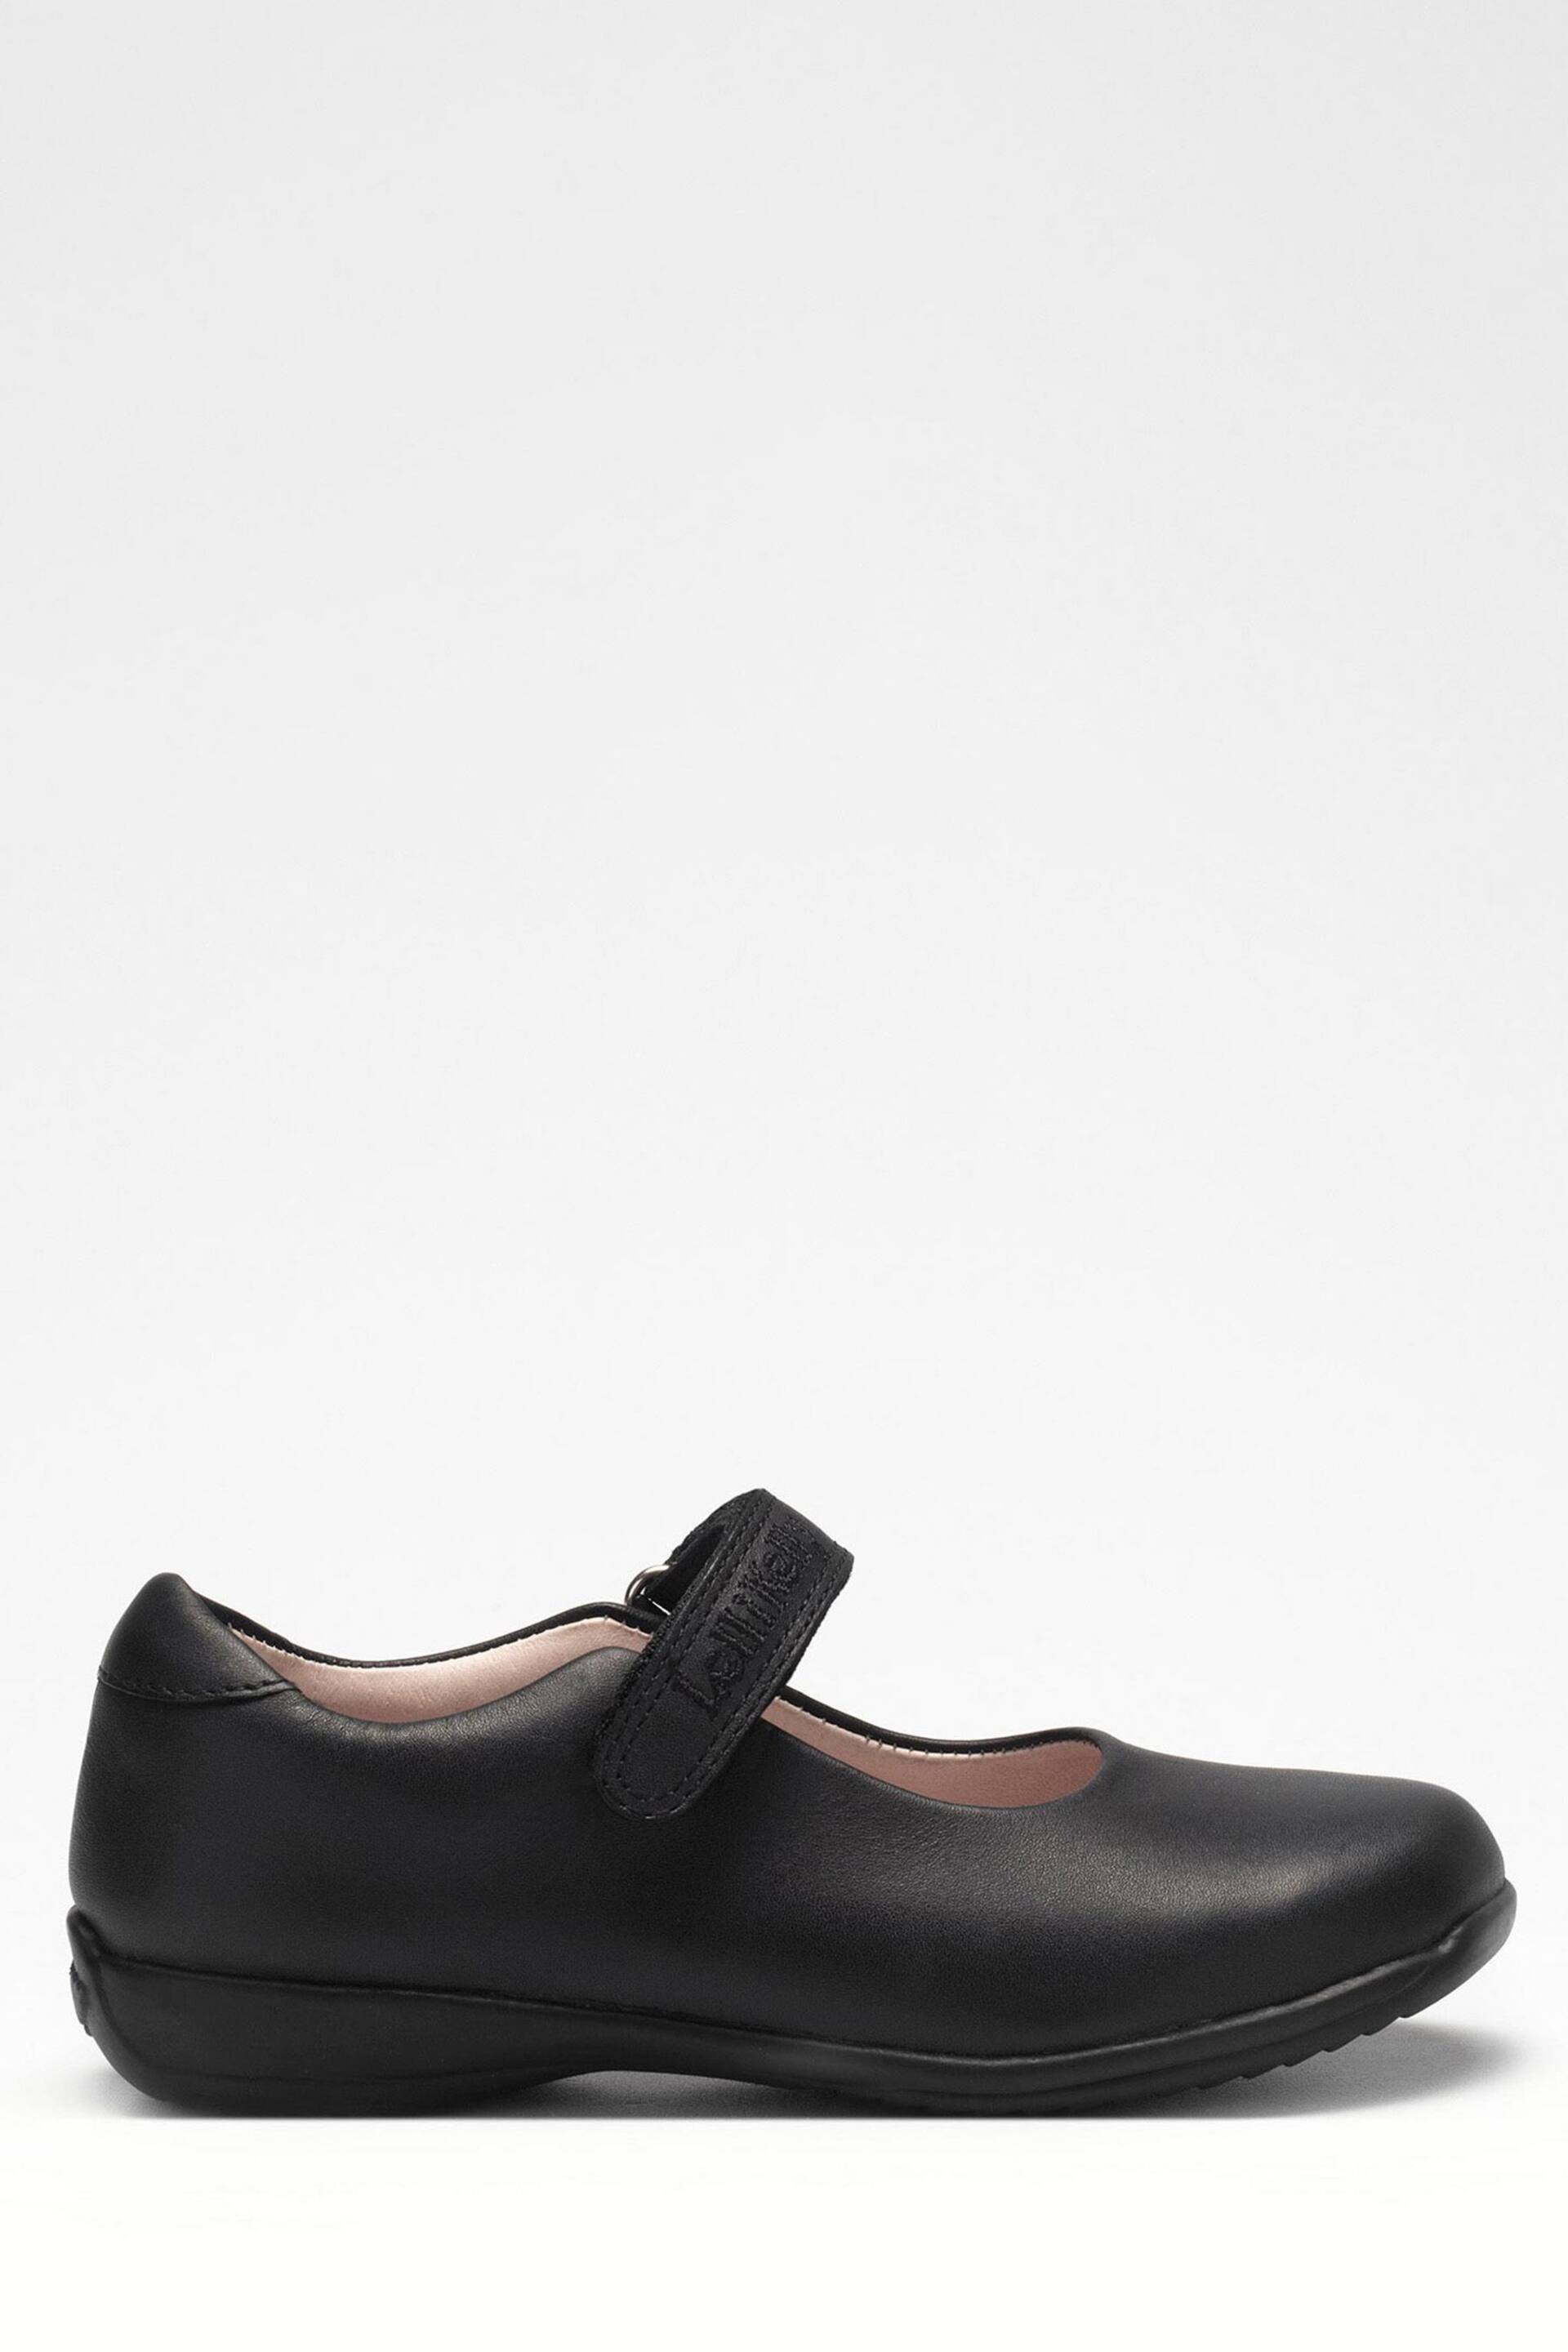 Lelli Kelly Classic Dolly Black Shoes - Image 1 of 5